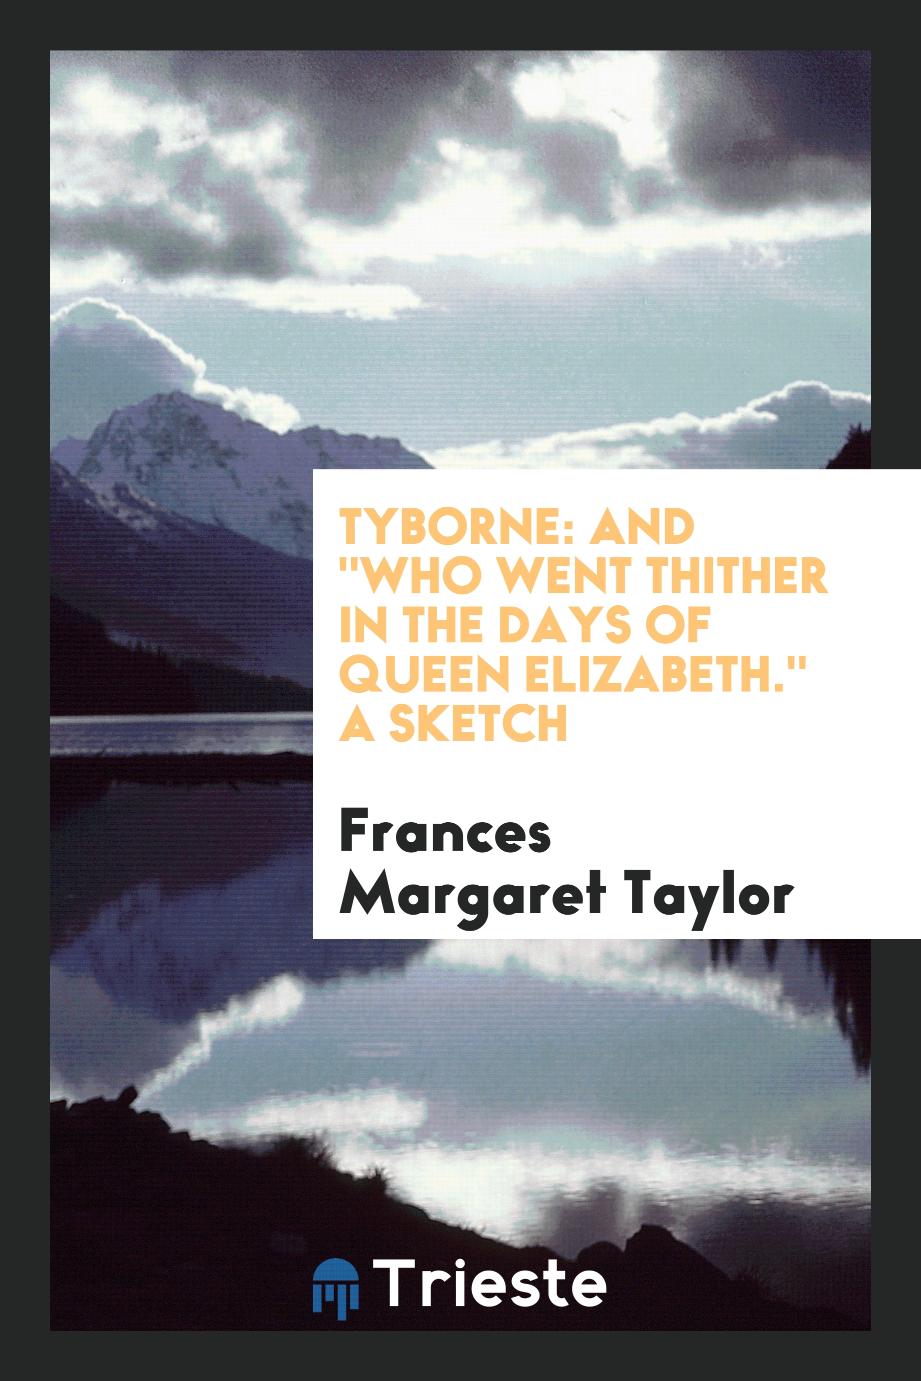 Tyborne: And "Who Went Thither in the Days of Queen Elizabeth." A Sketch